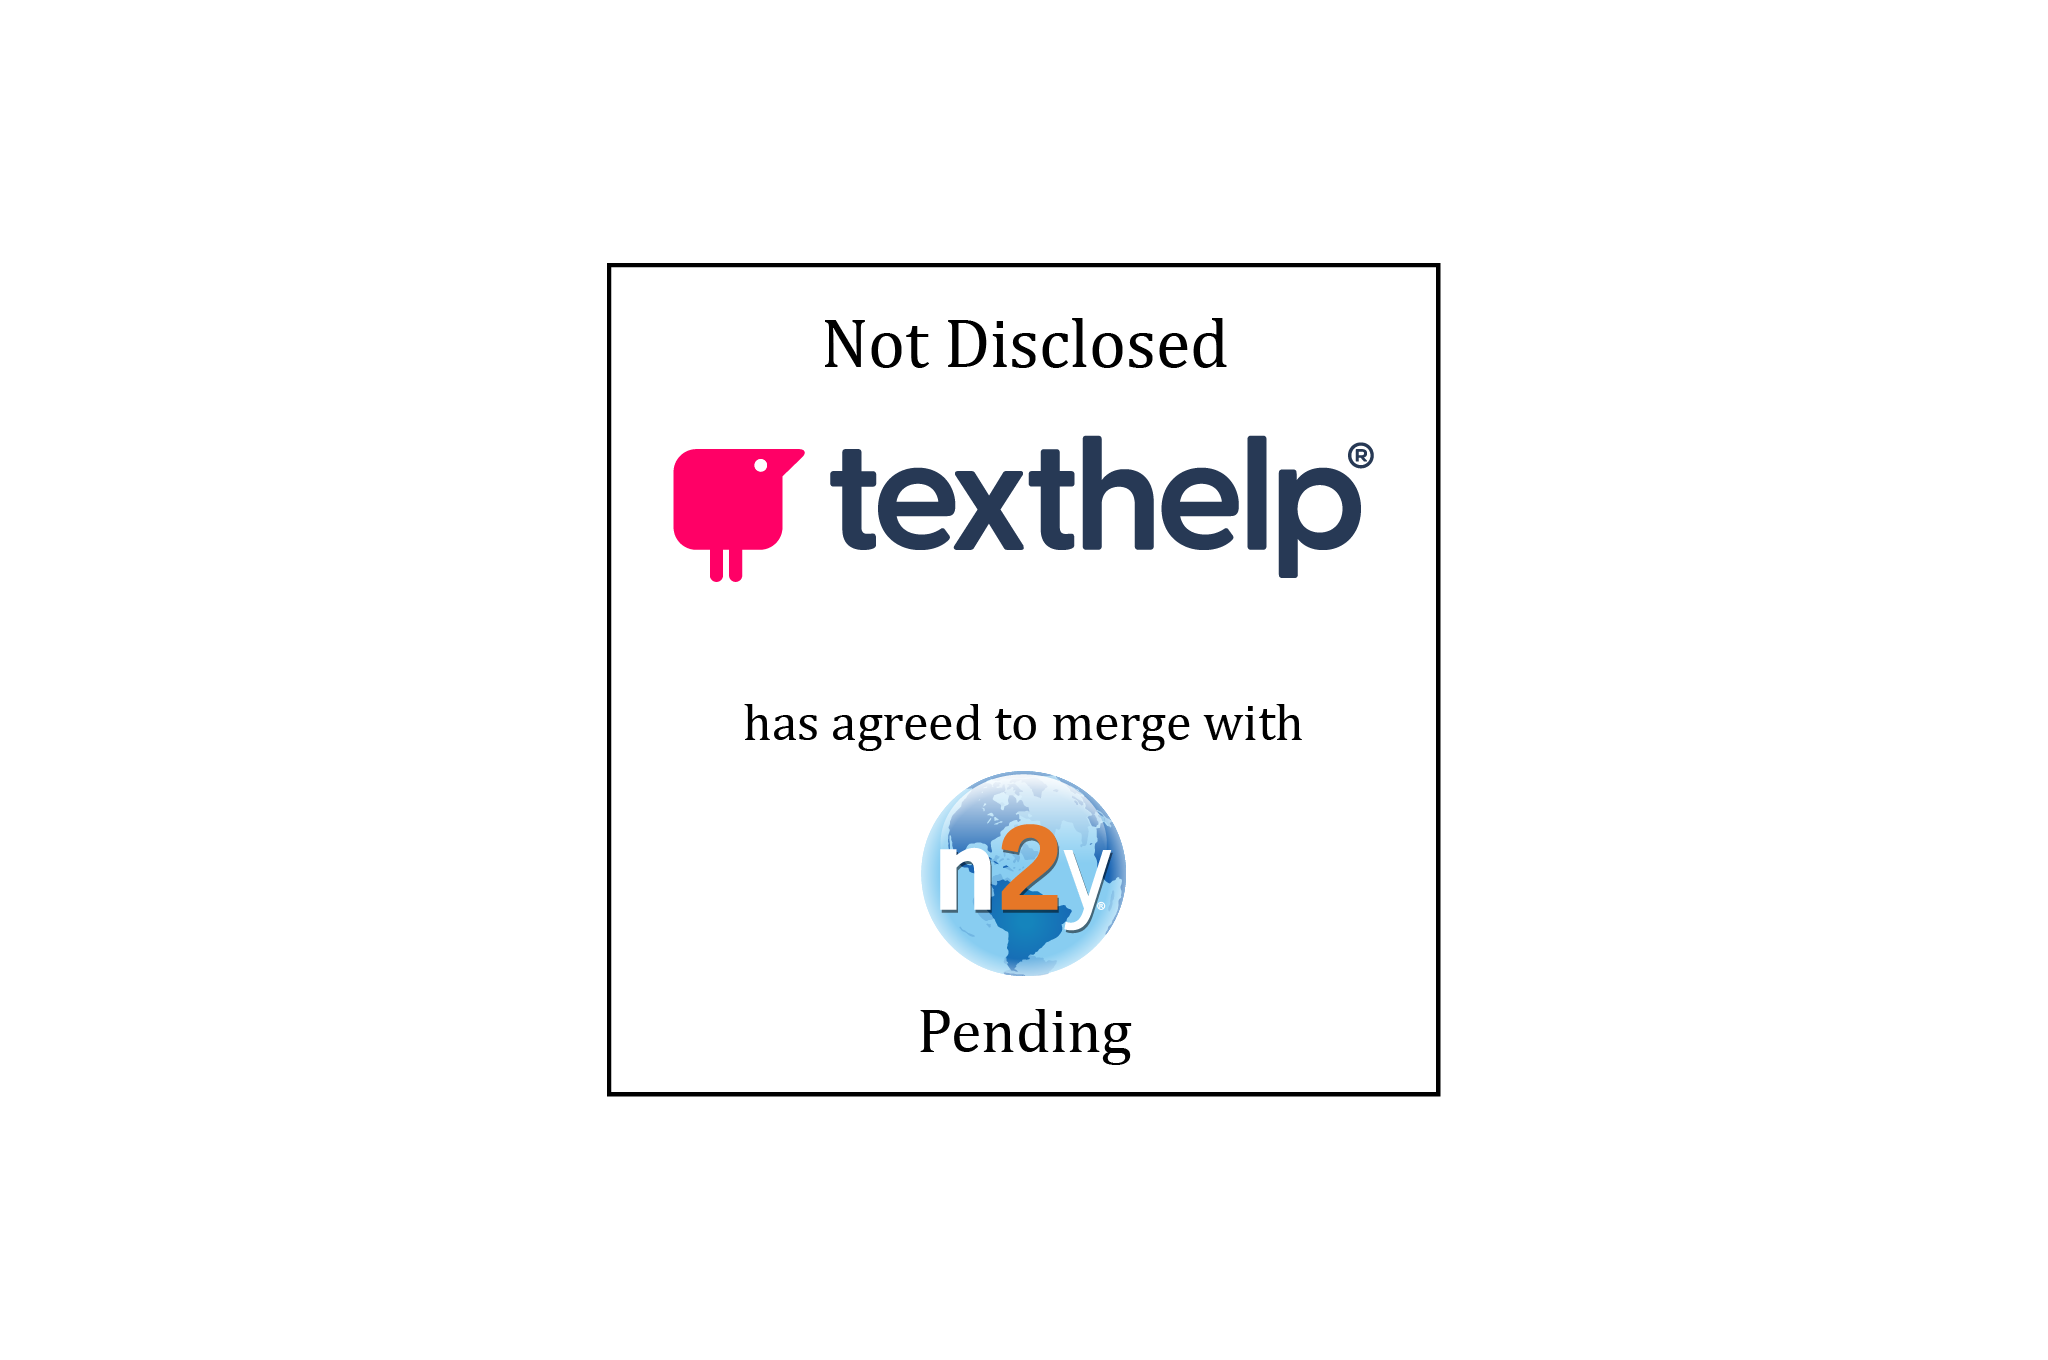 Texthelp has Agreed to Merge with n2y 